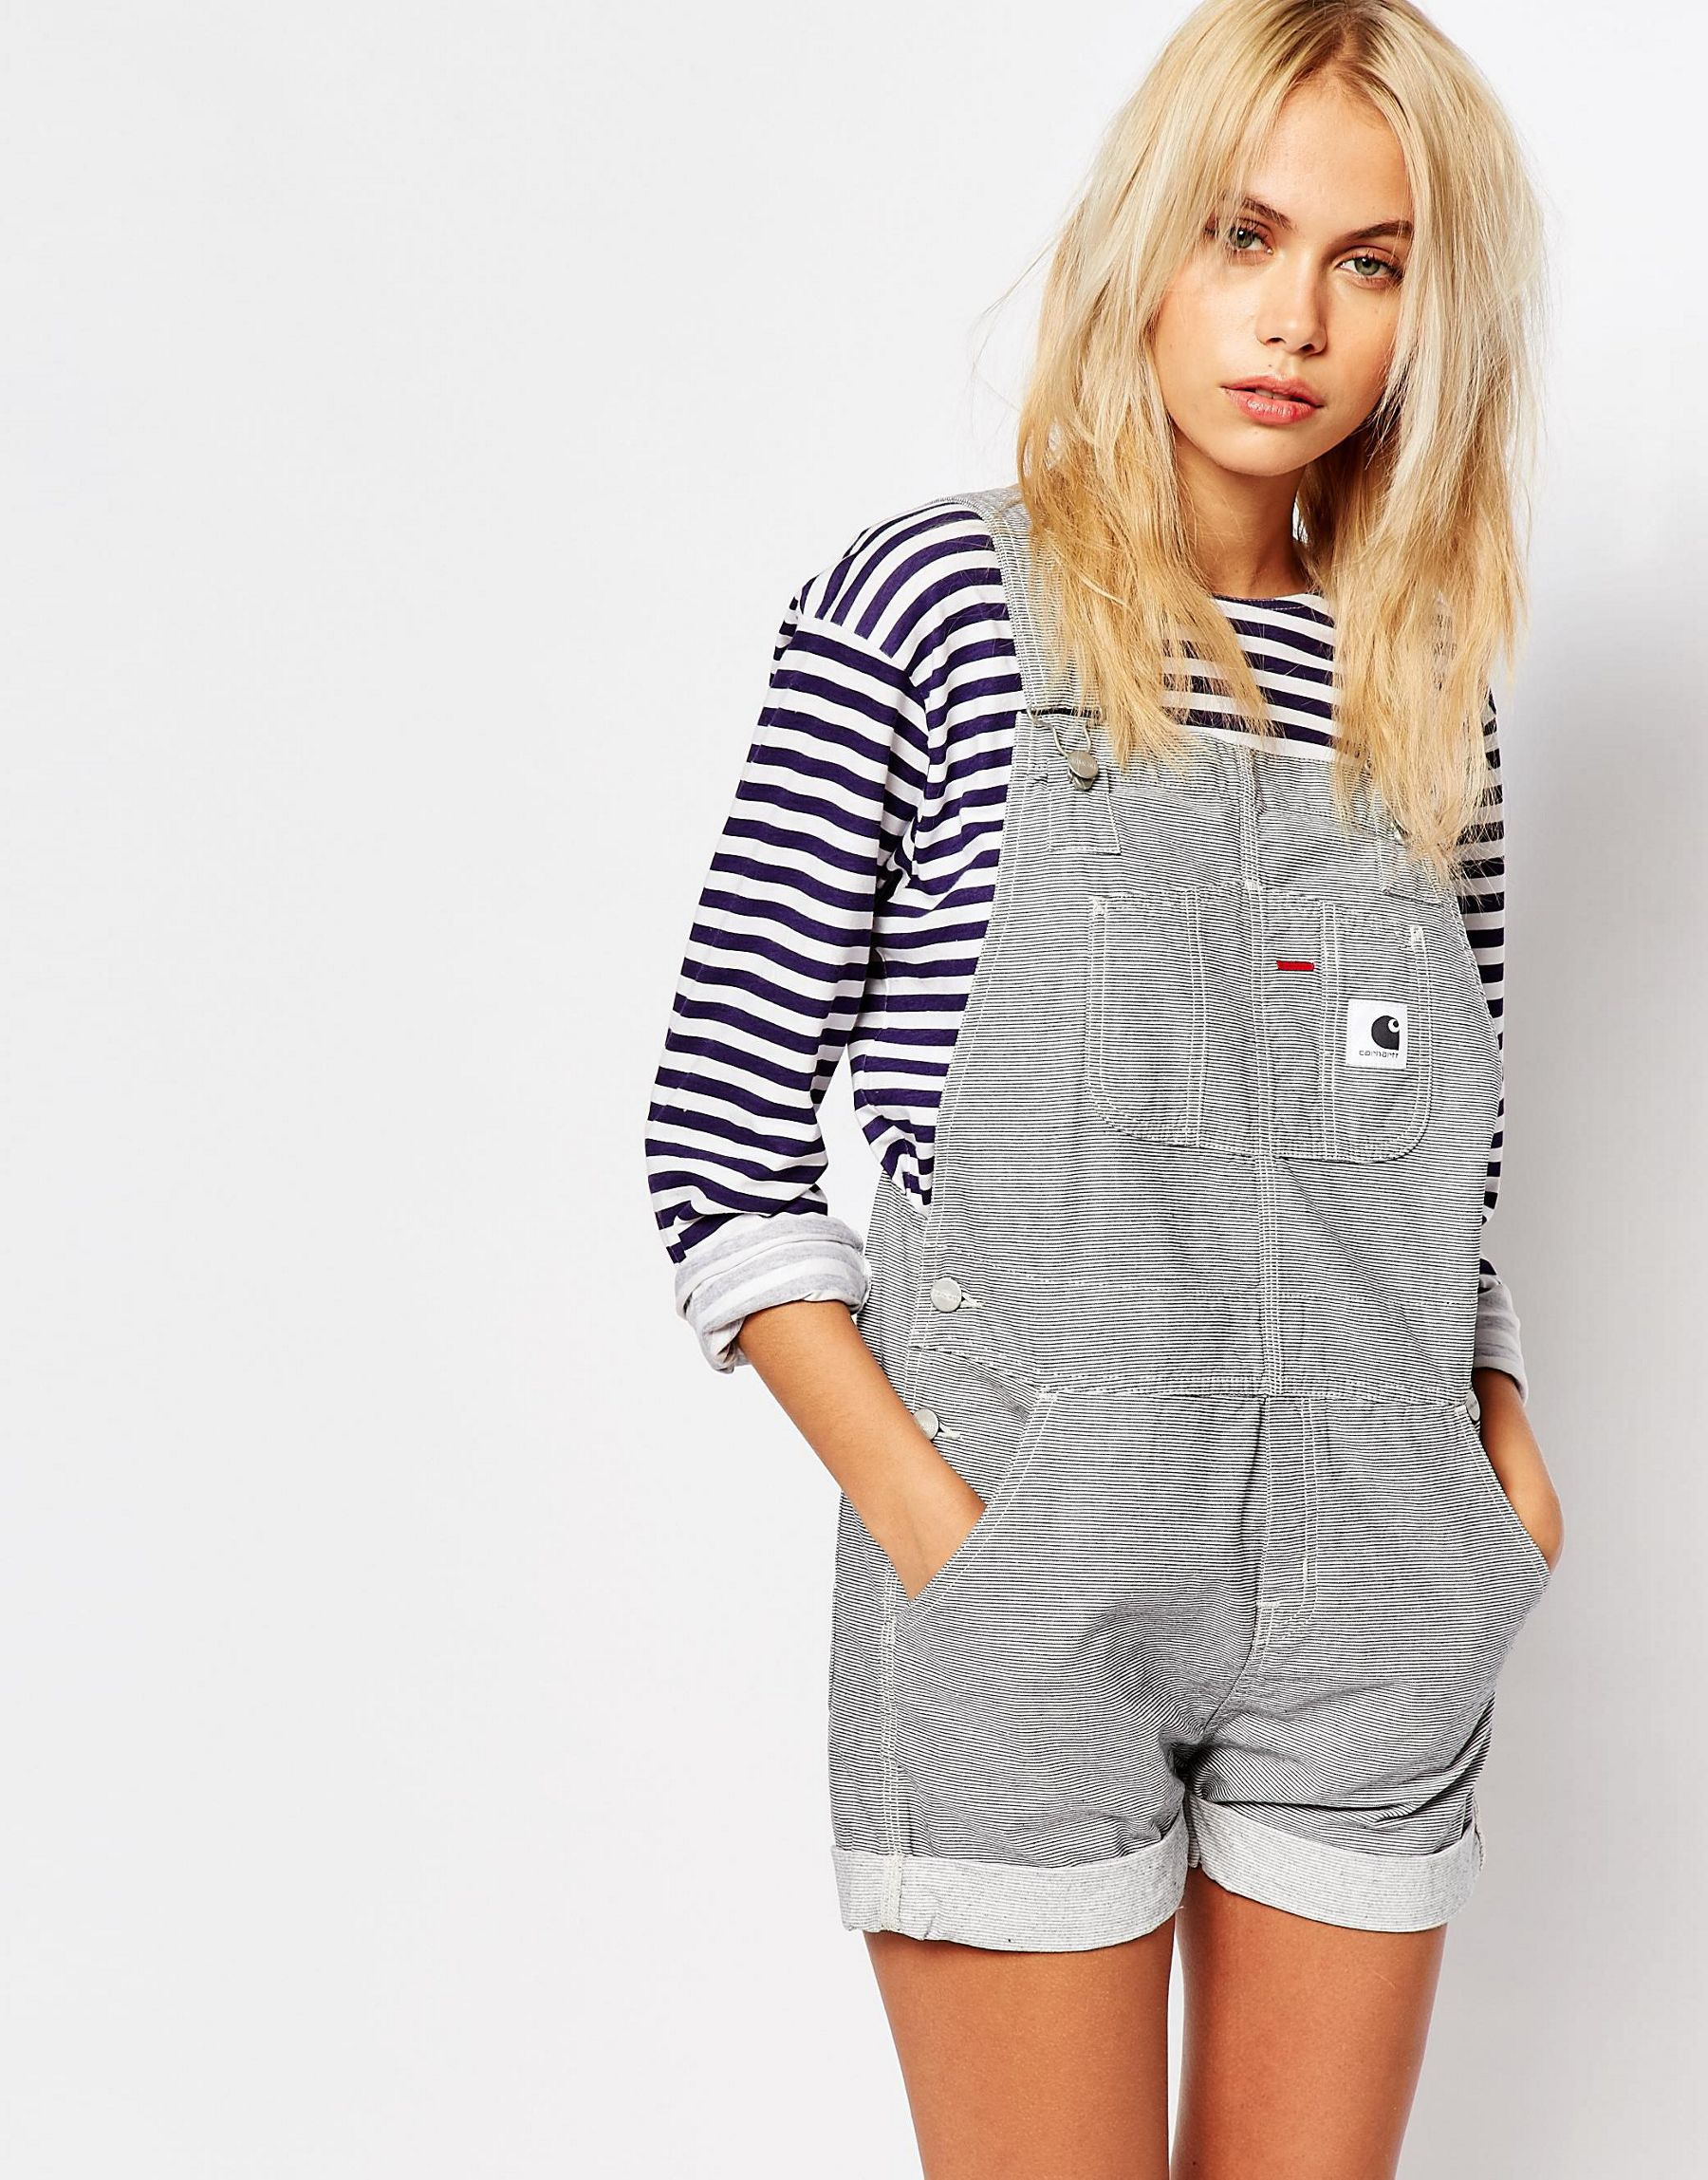 Carhartt WIP Cotton Carhartt Dungaree Playsuit In Hickory Stripe in Blue |  Lyst